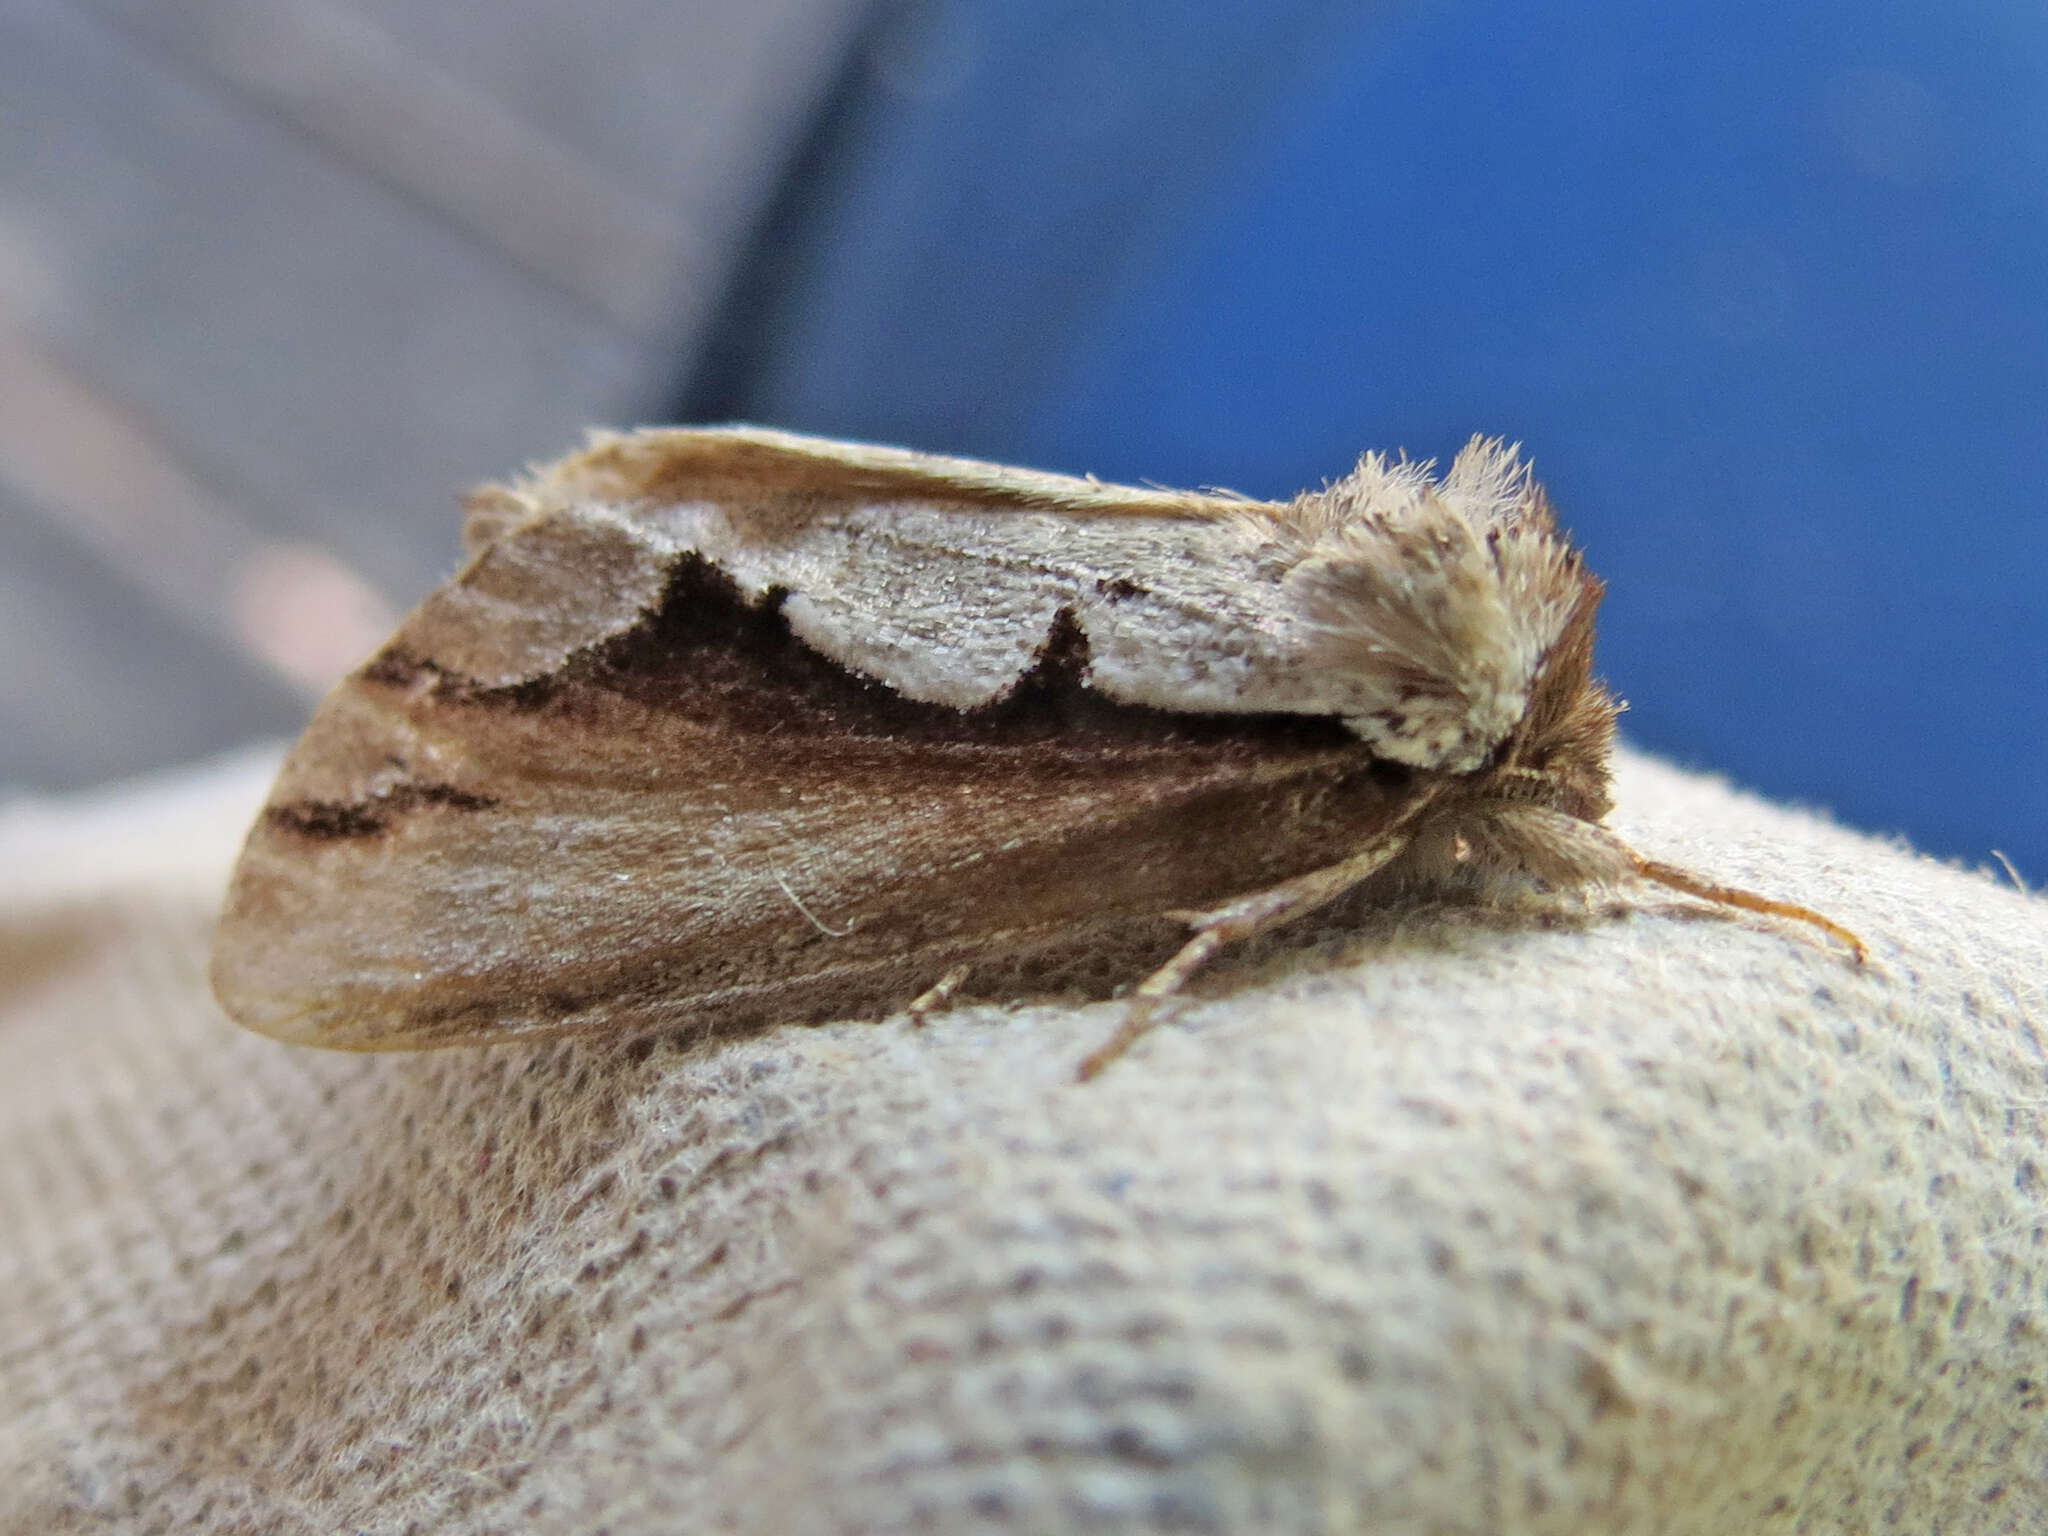 Image of Double-toothed Prominent